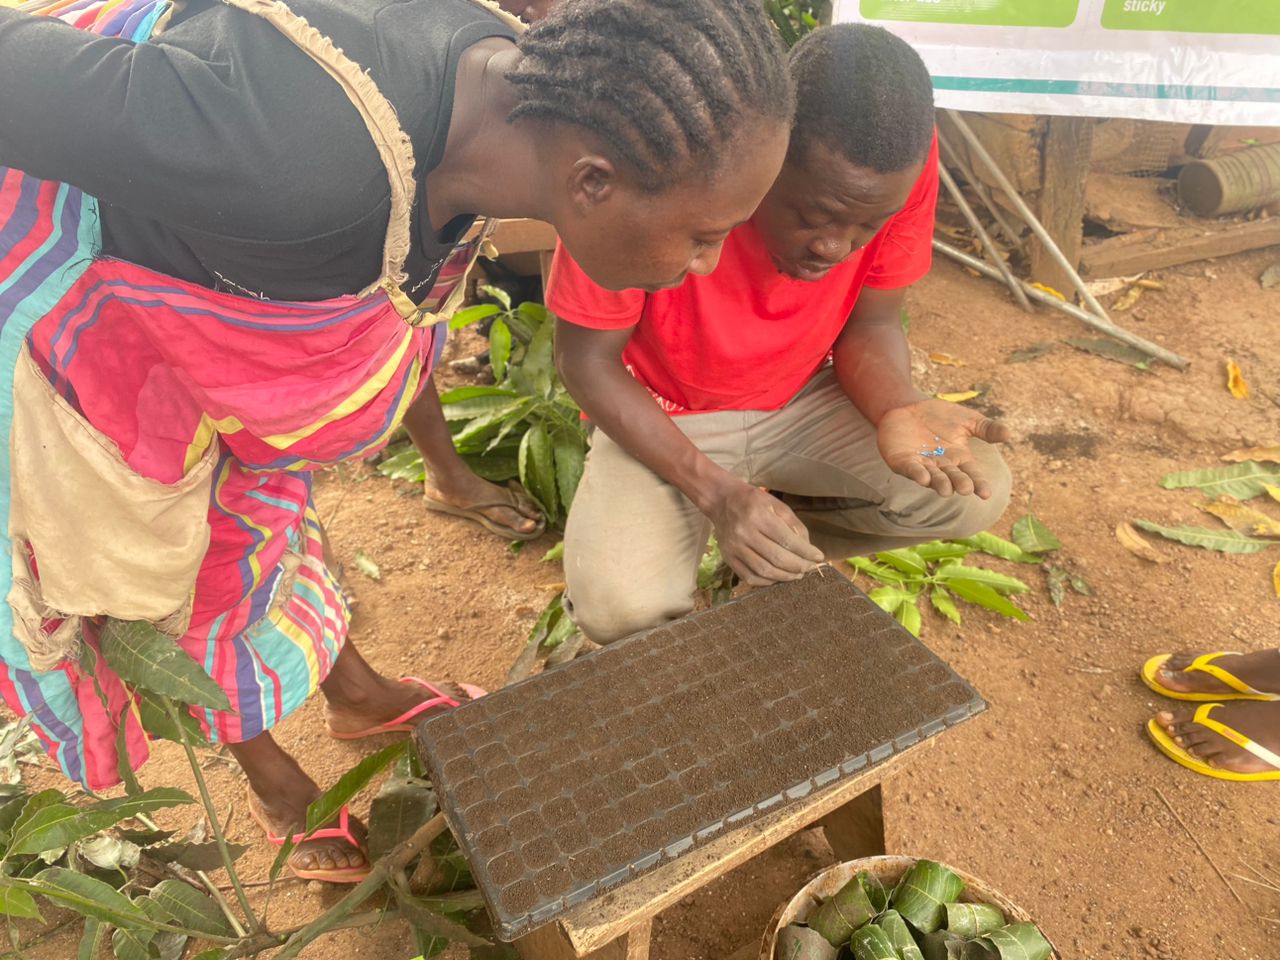 Woman farmer watches as an EWS-KT trainer plants seeds in a seedling tray.